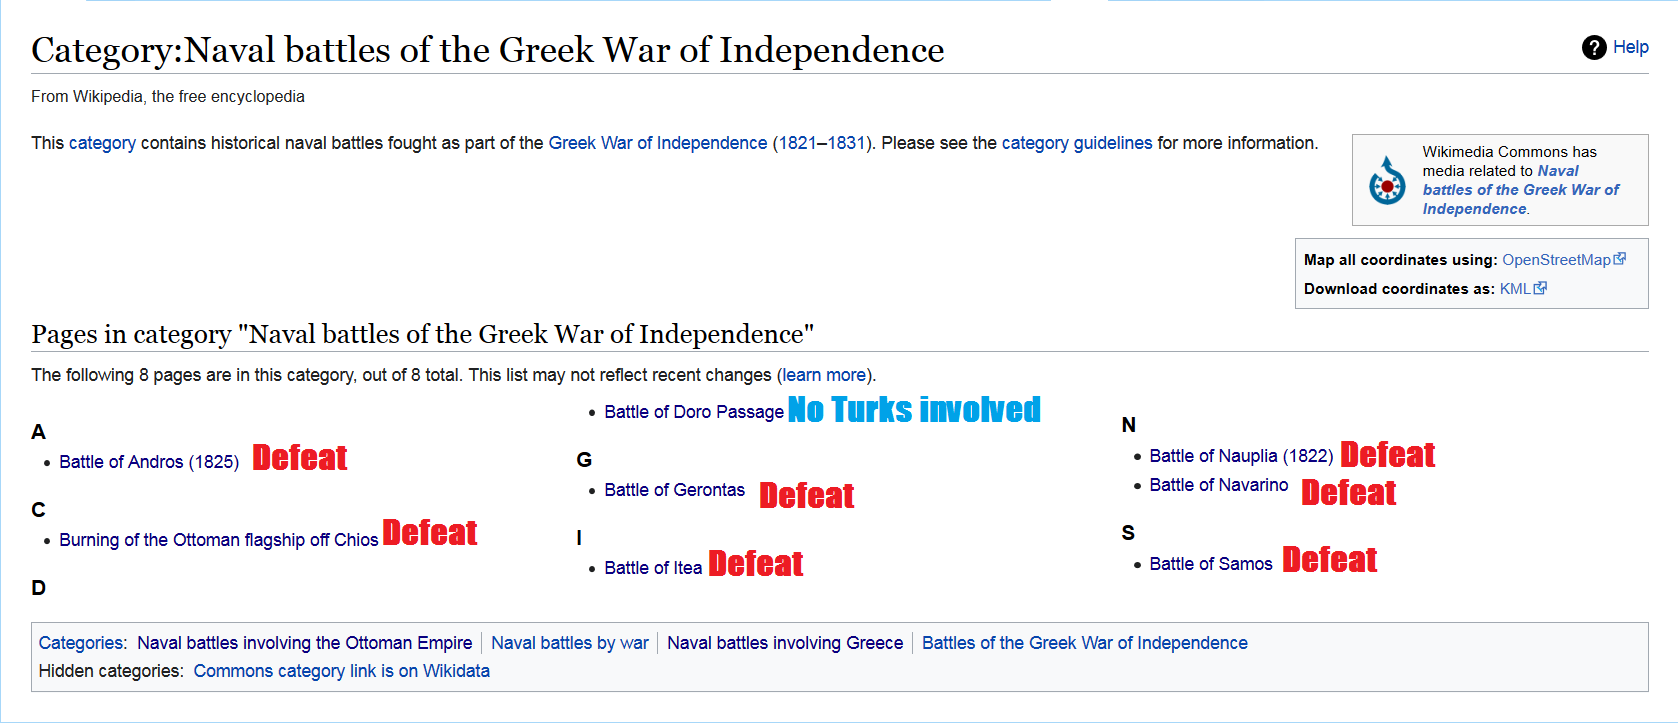 Screenshot_2021-11-12 Category Naval battles of the Greek War of Independence - Wikipedia.png